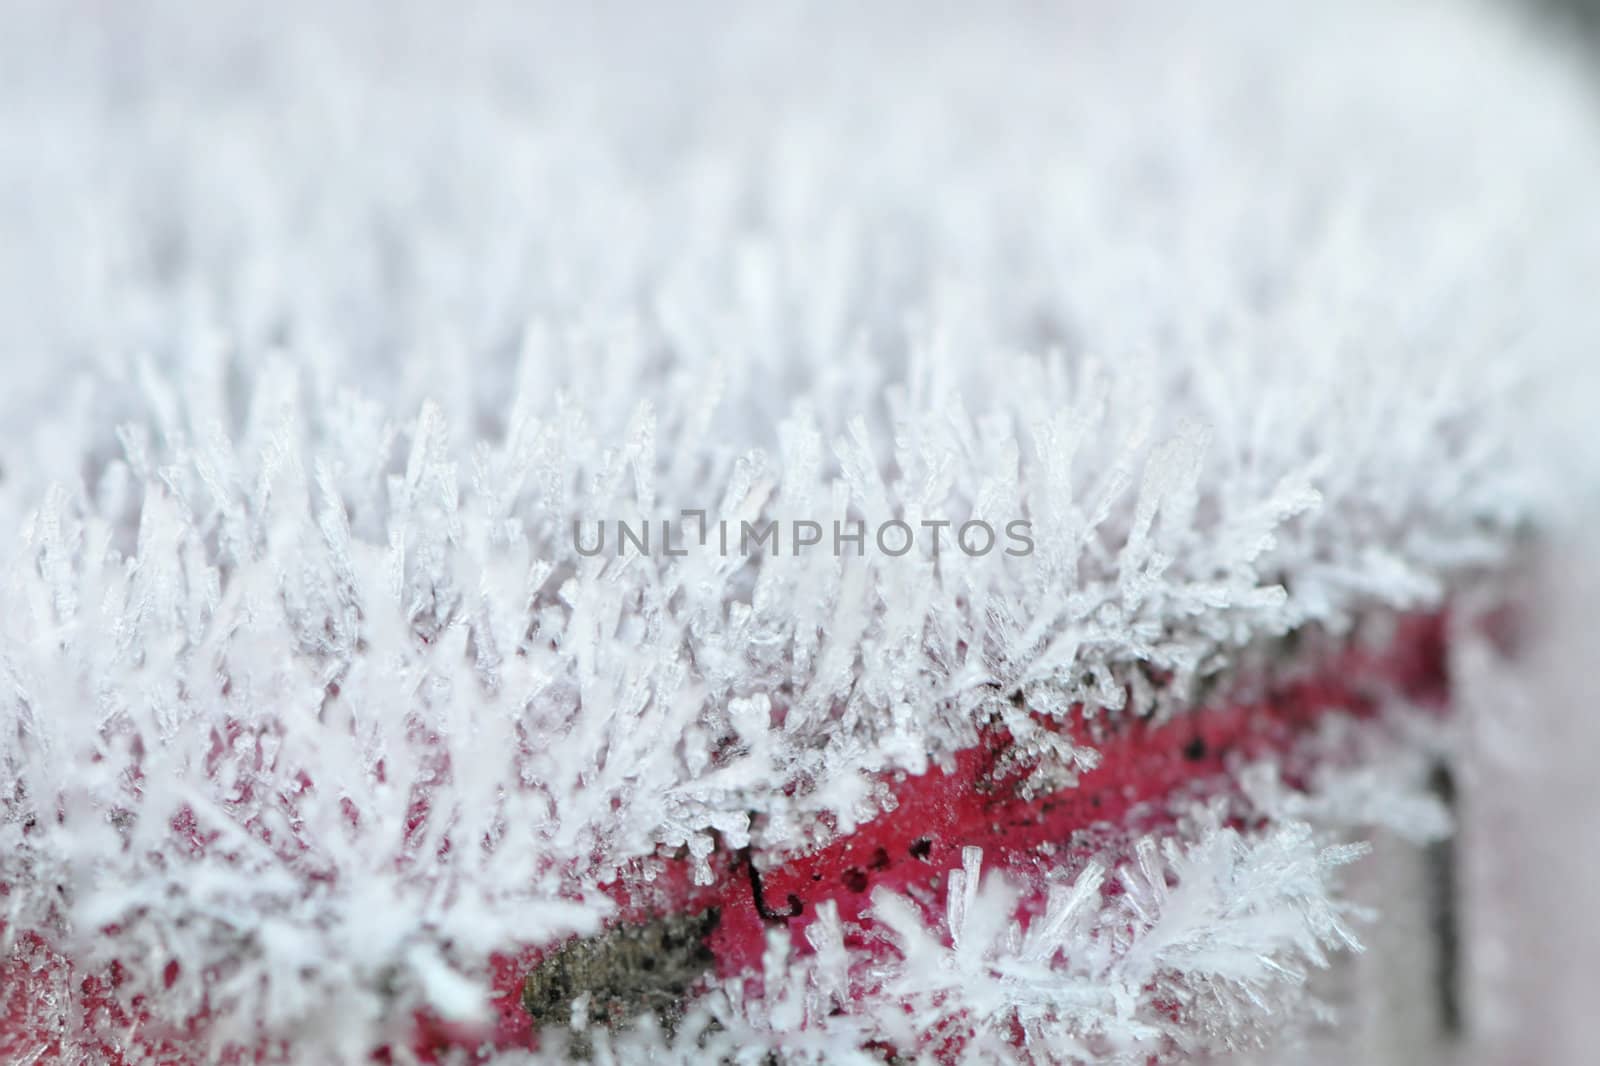 Lot of Frost on a Picket with a Red Line and a blurred effect